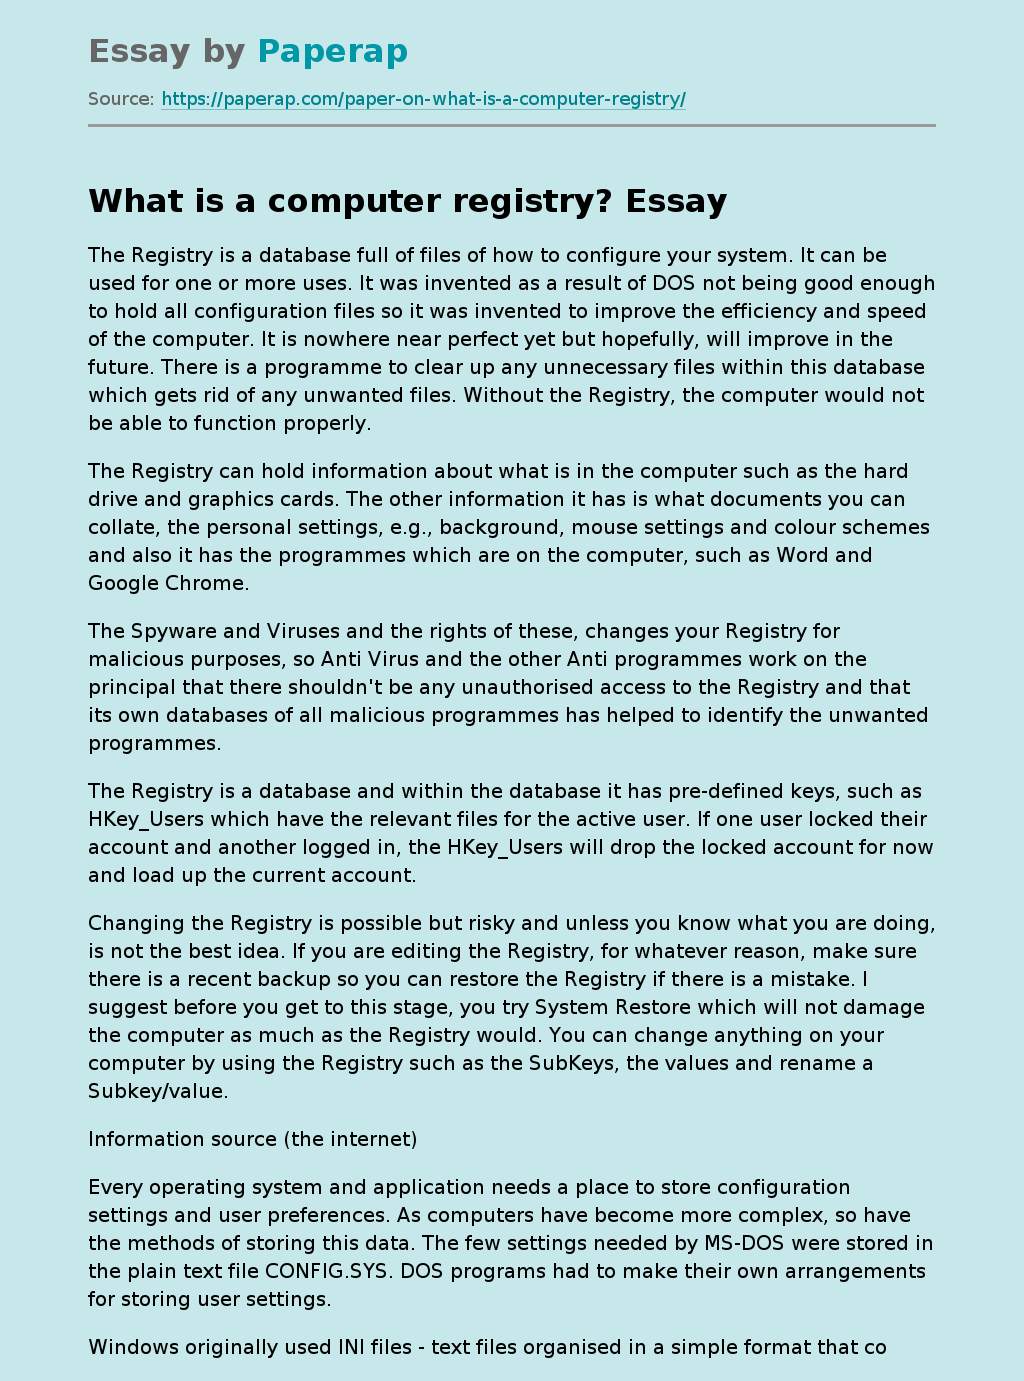 What is a computer registry?